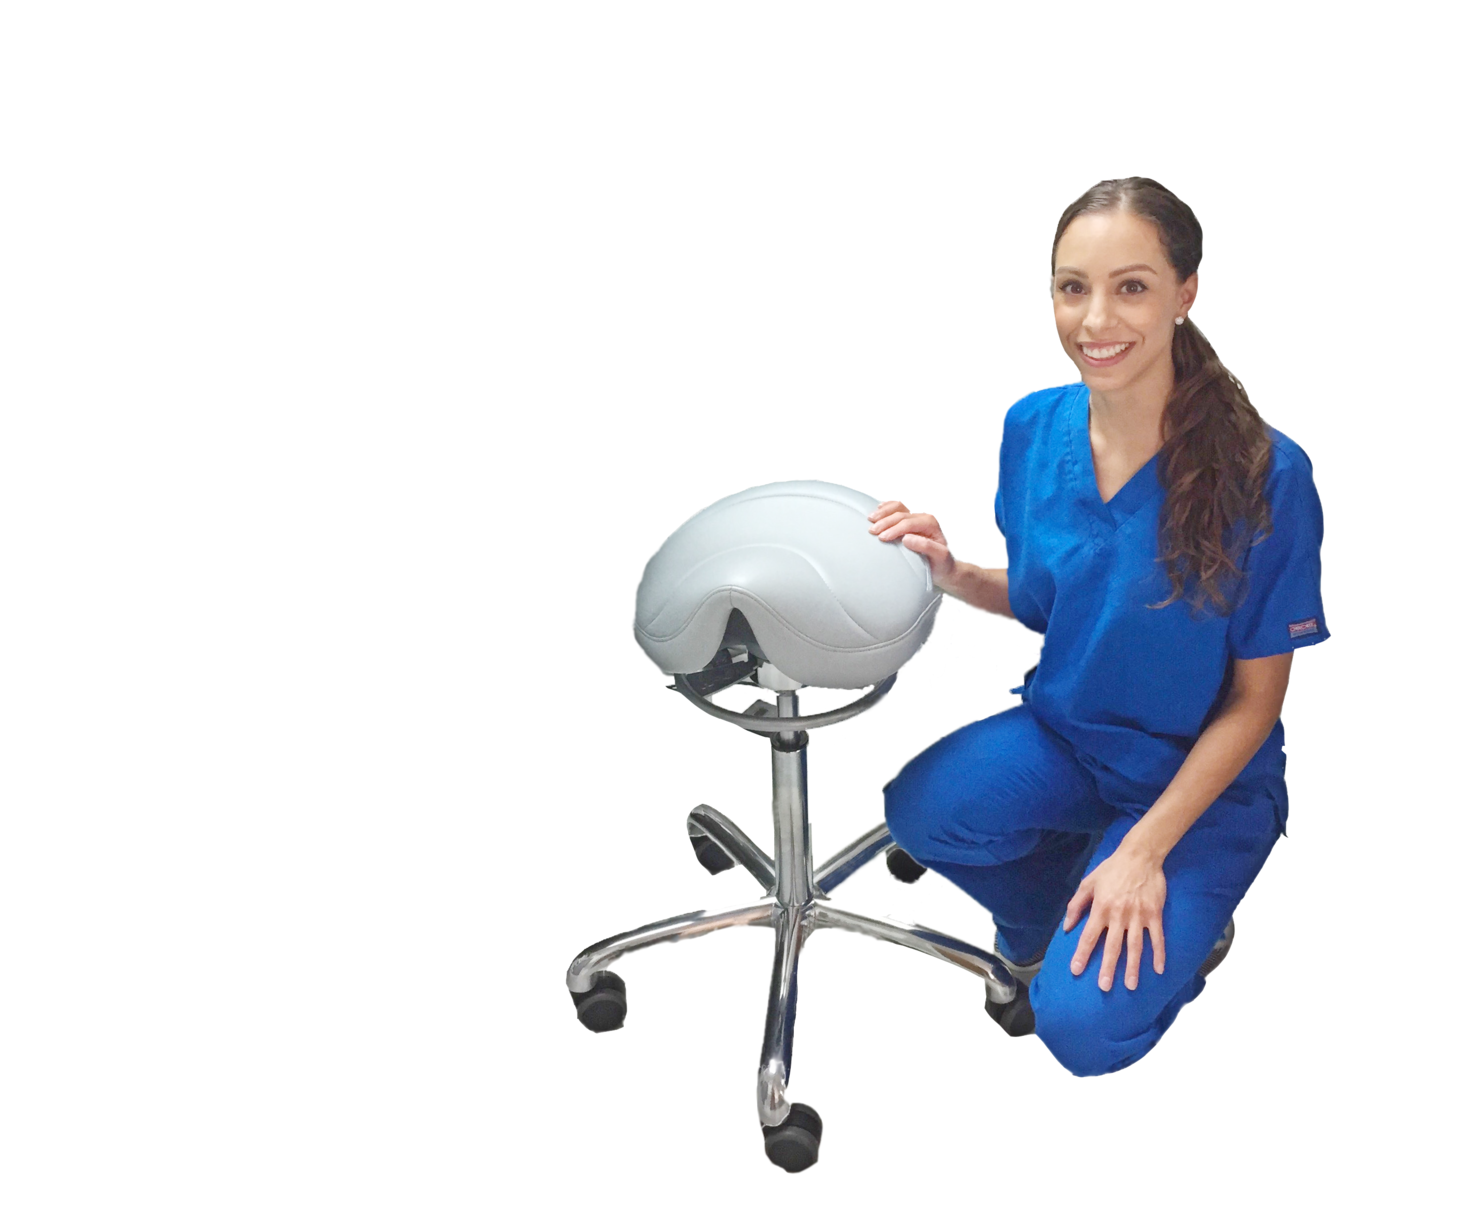 Check Out What This Hygienist Says About The Saddle Stool Brewer Company